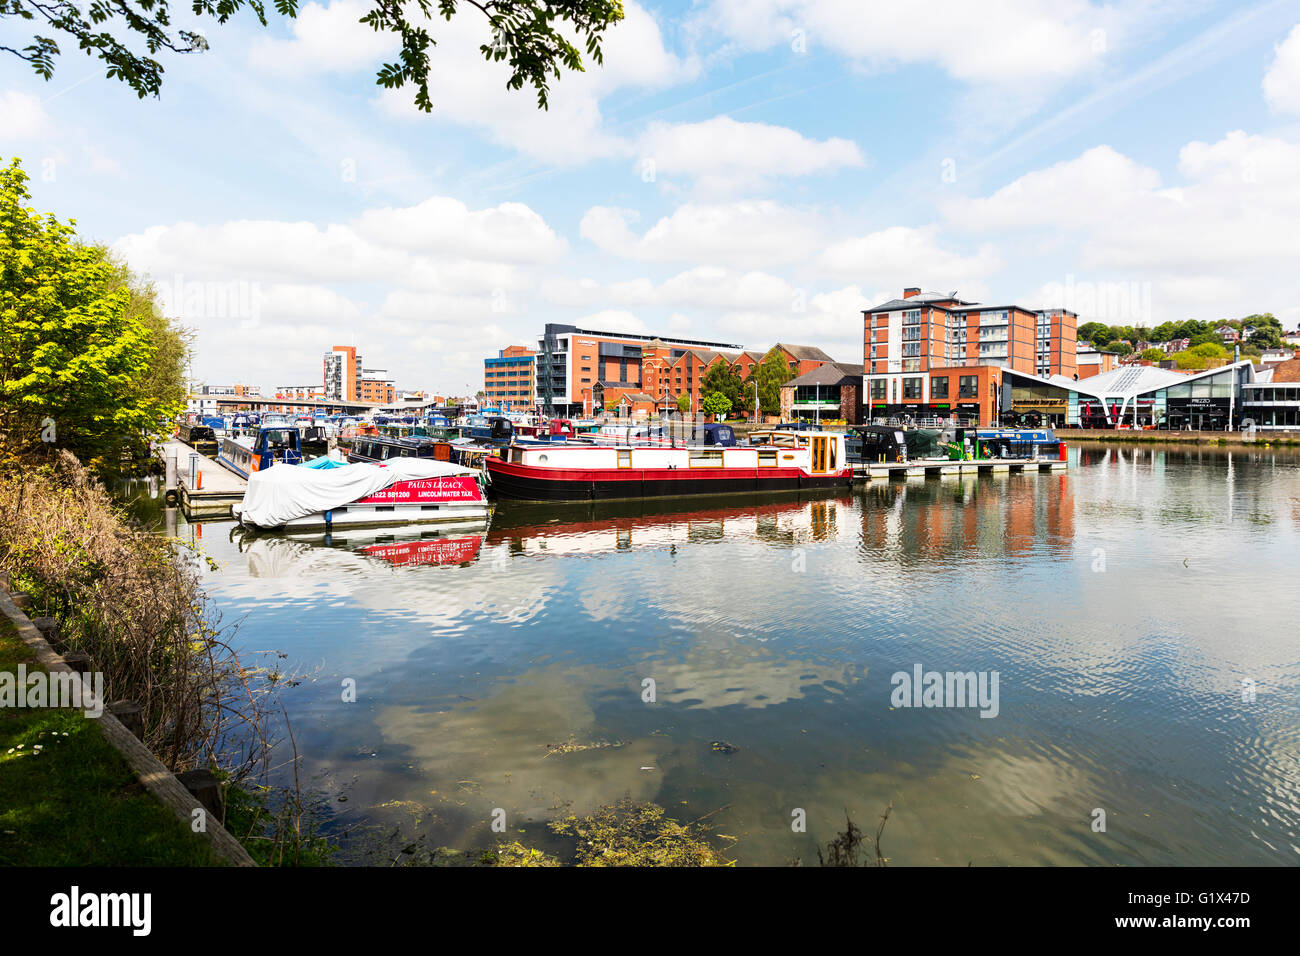 Brayford Pool Lincoln Waterfront boats Lincolnshire England United Kingdom Lincoln City Lincolnshire UK English cities Stock Photo